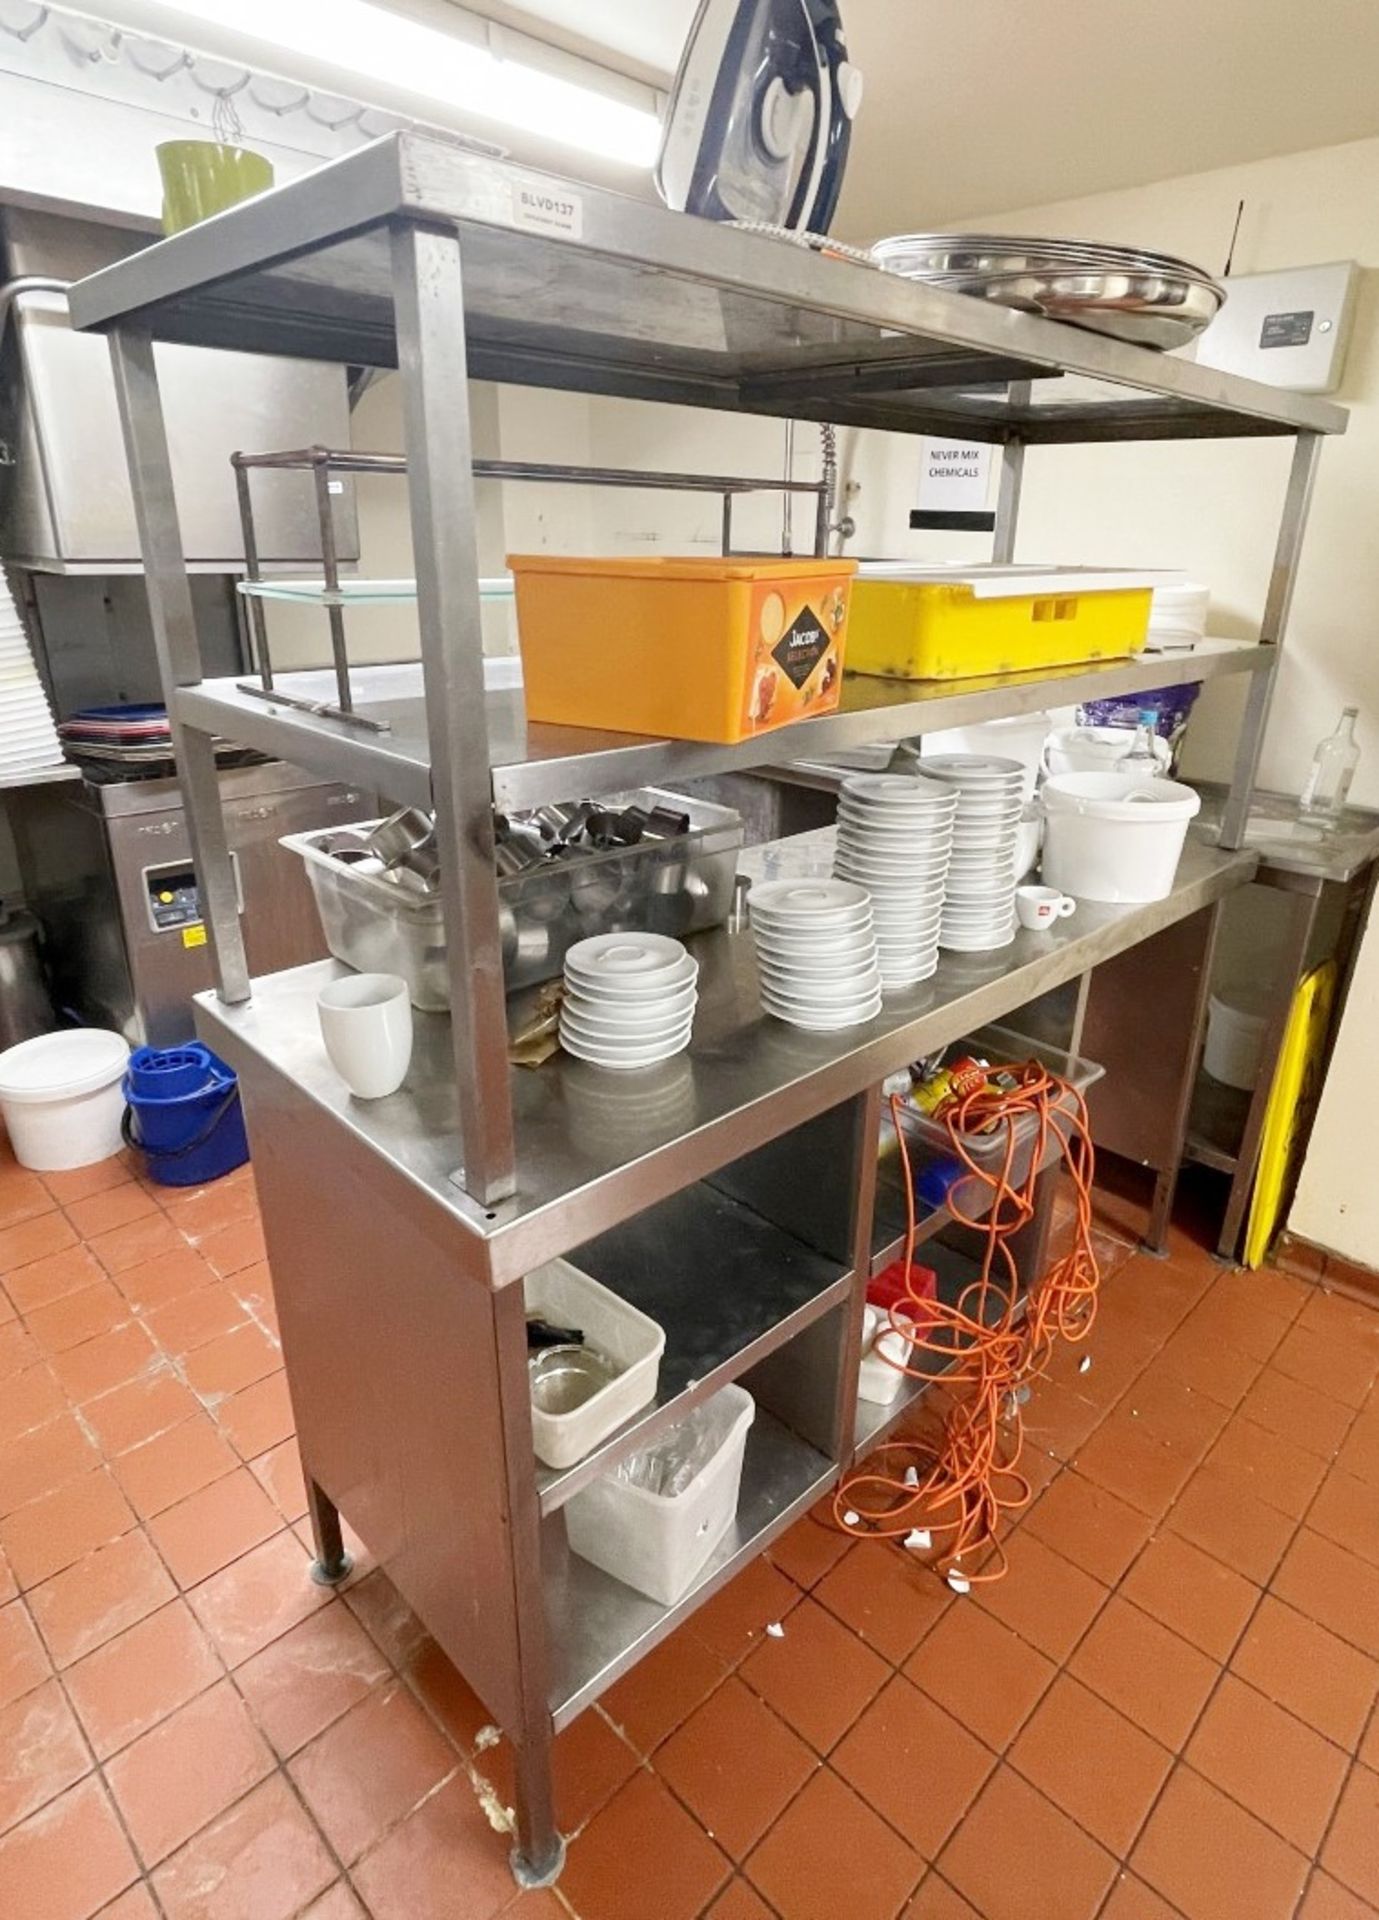 1 x Stainless Steel Passthrough Prep Bench For Commercial Kitchens - Dimensions: H160 x W160 x D60